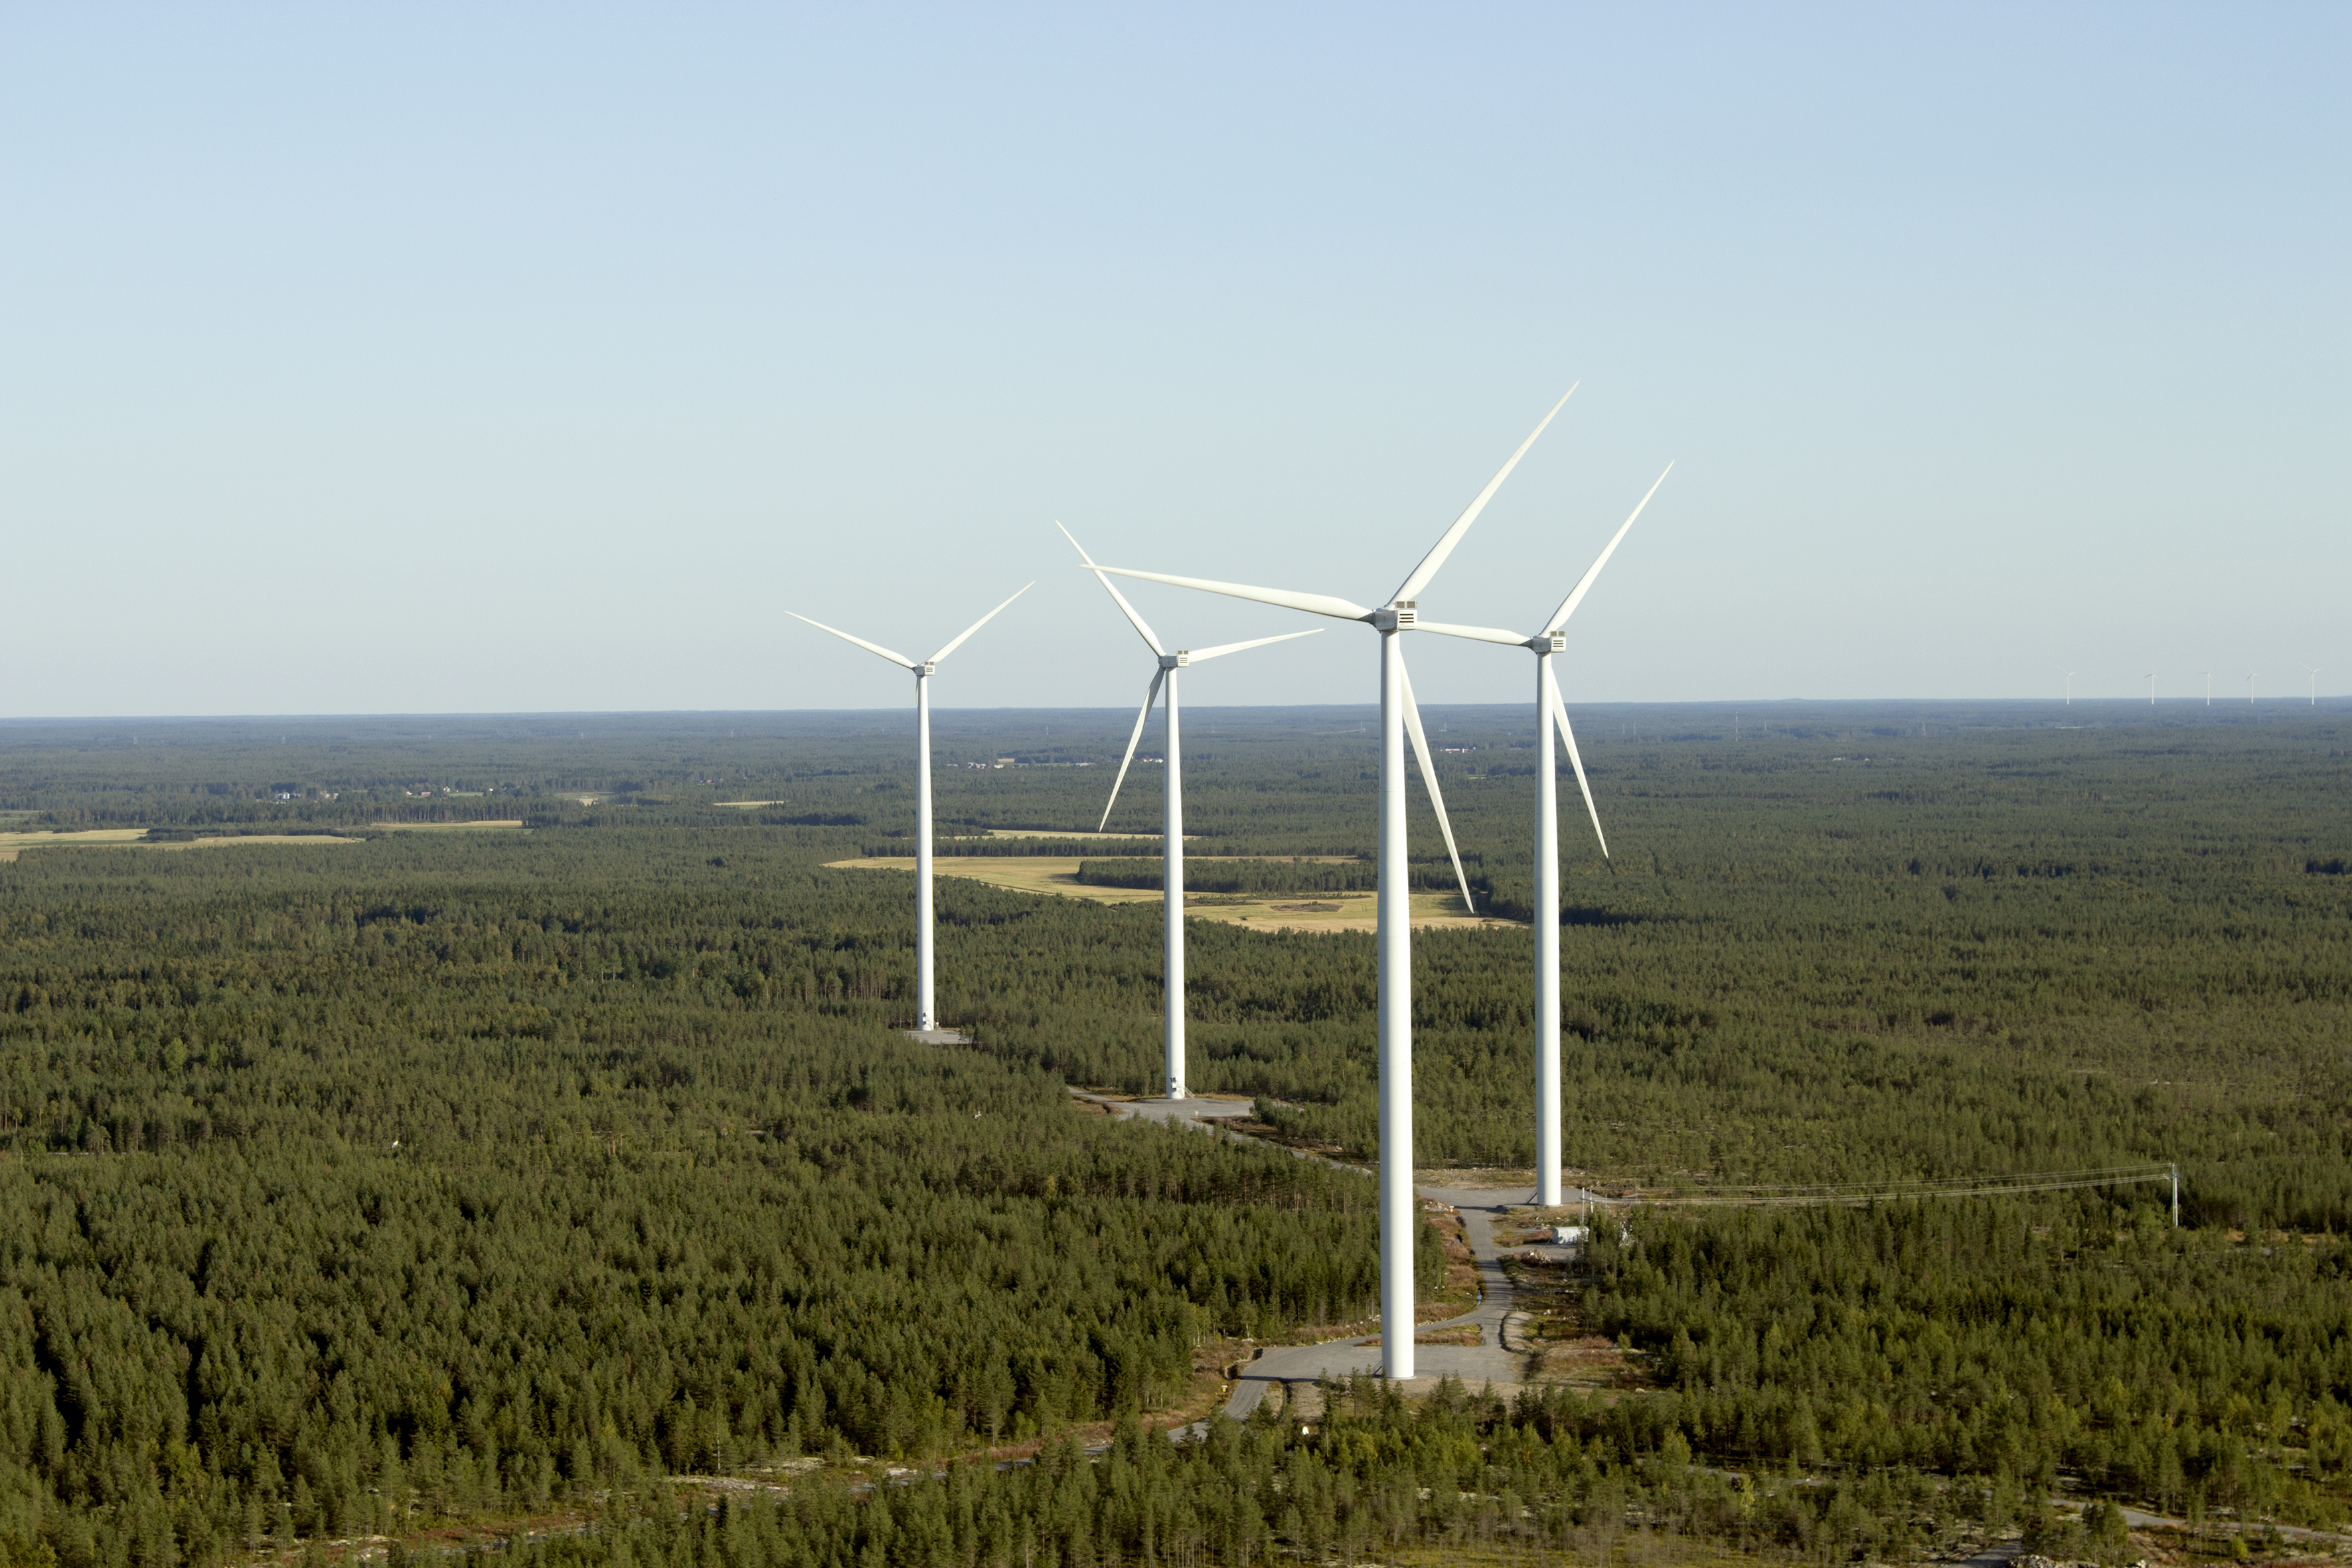 Share of carbon-free electricity soon over 90% in Finland